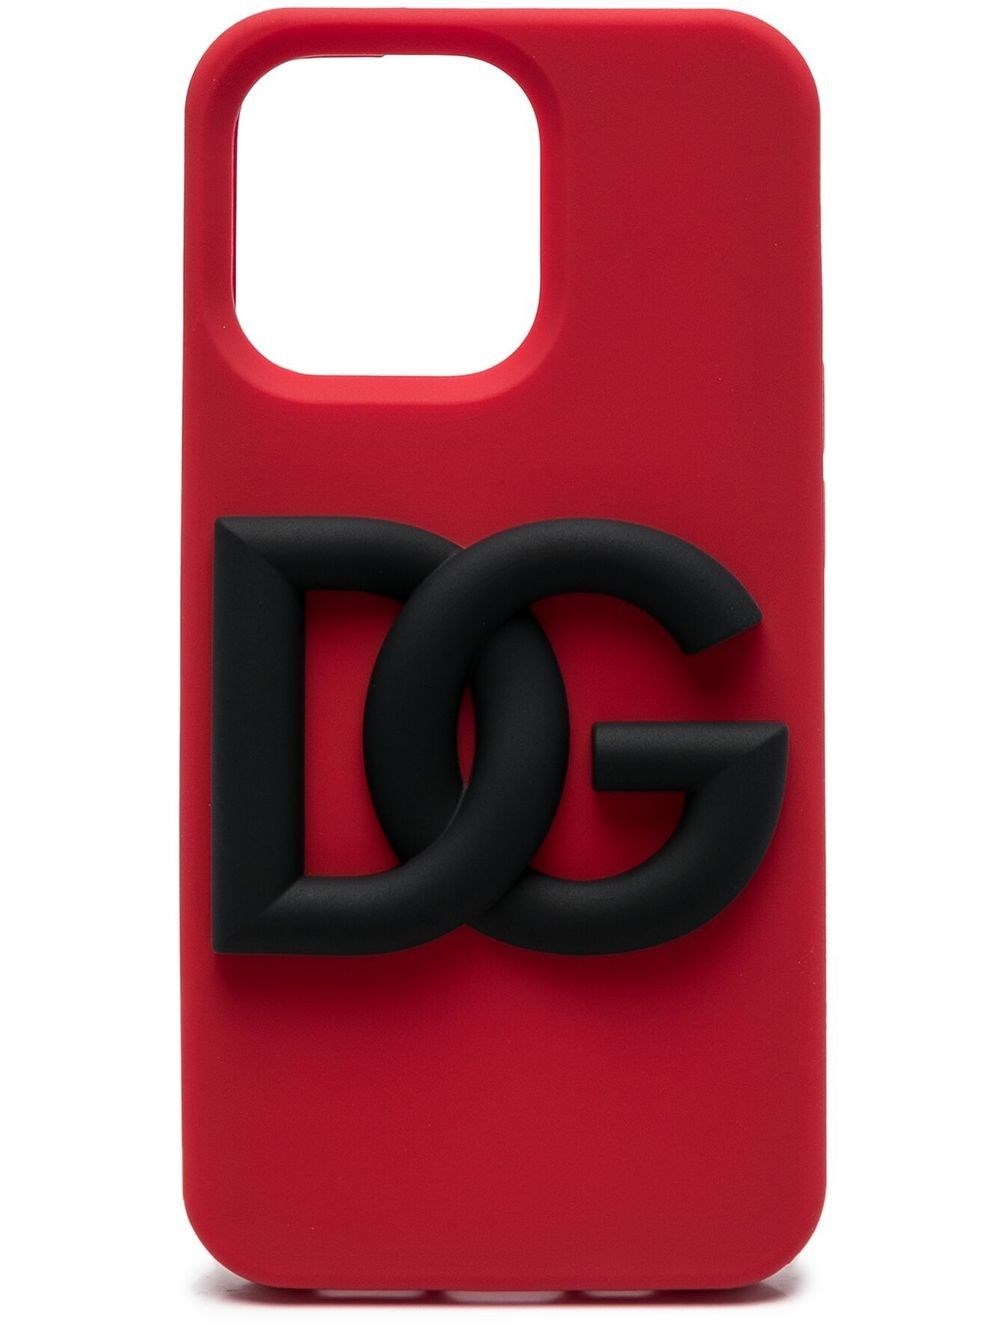 dolce & gabbana iPhone 13 Pro cover with logo available on